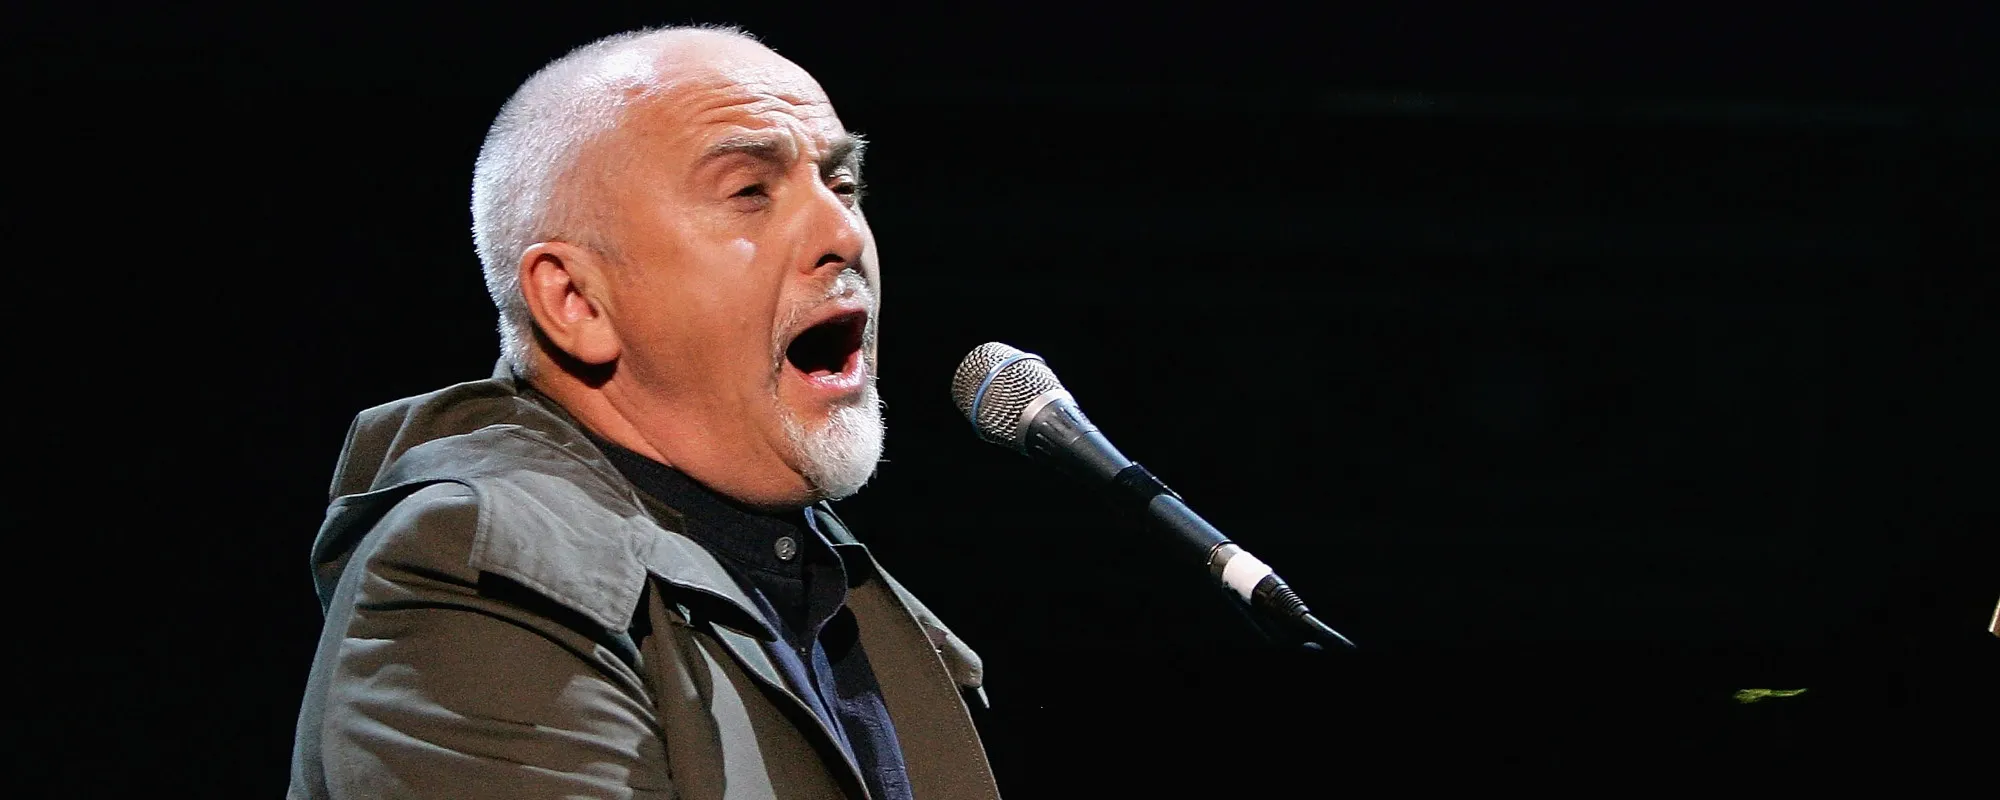 The Inner Exploration Behind Peter Gabriel’s “Digging in the Dirt”